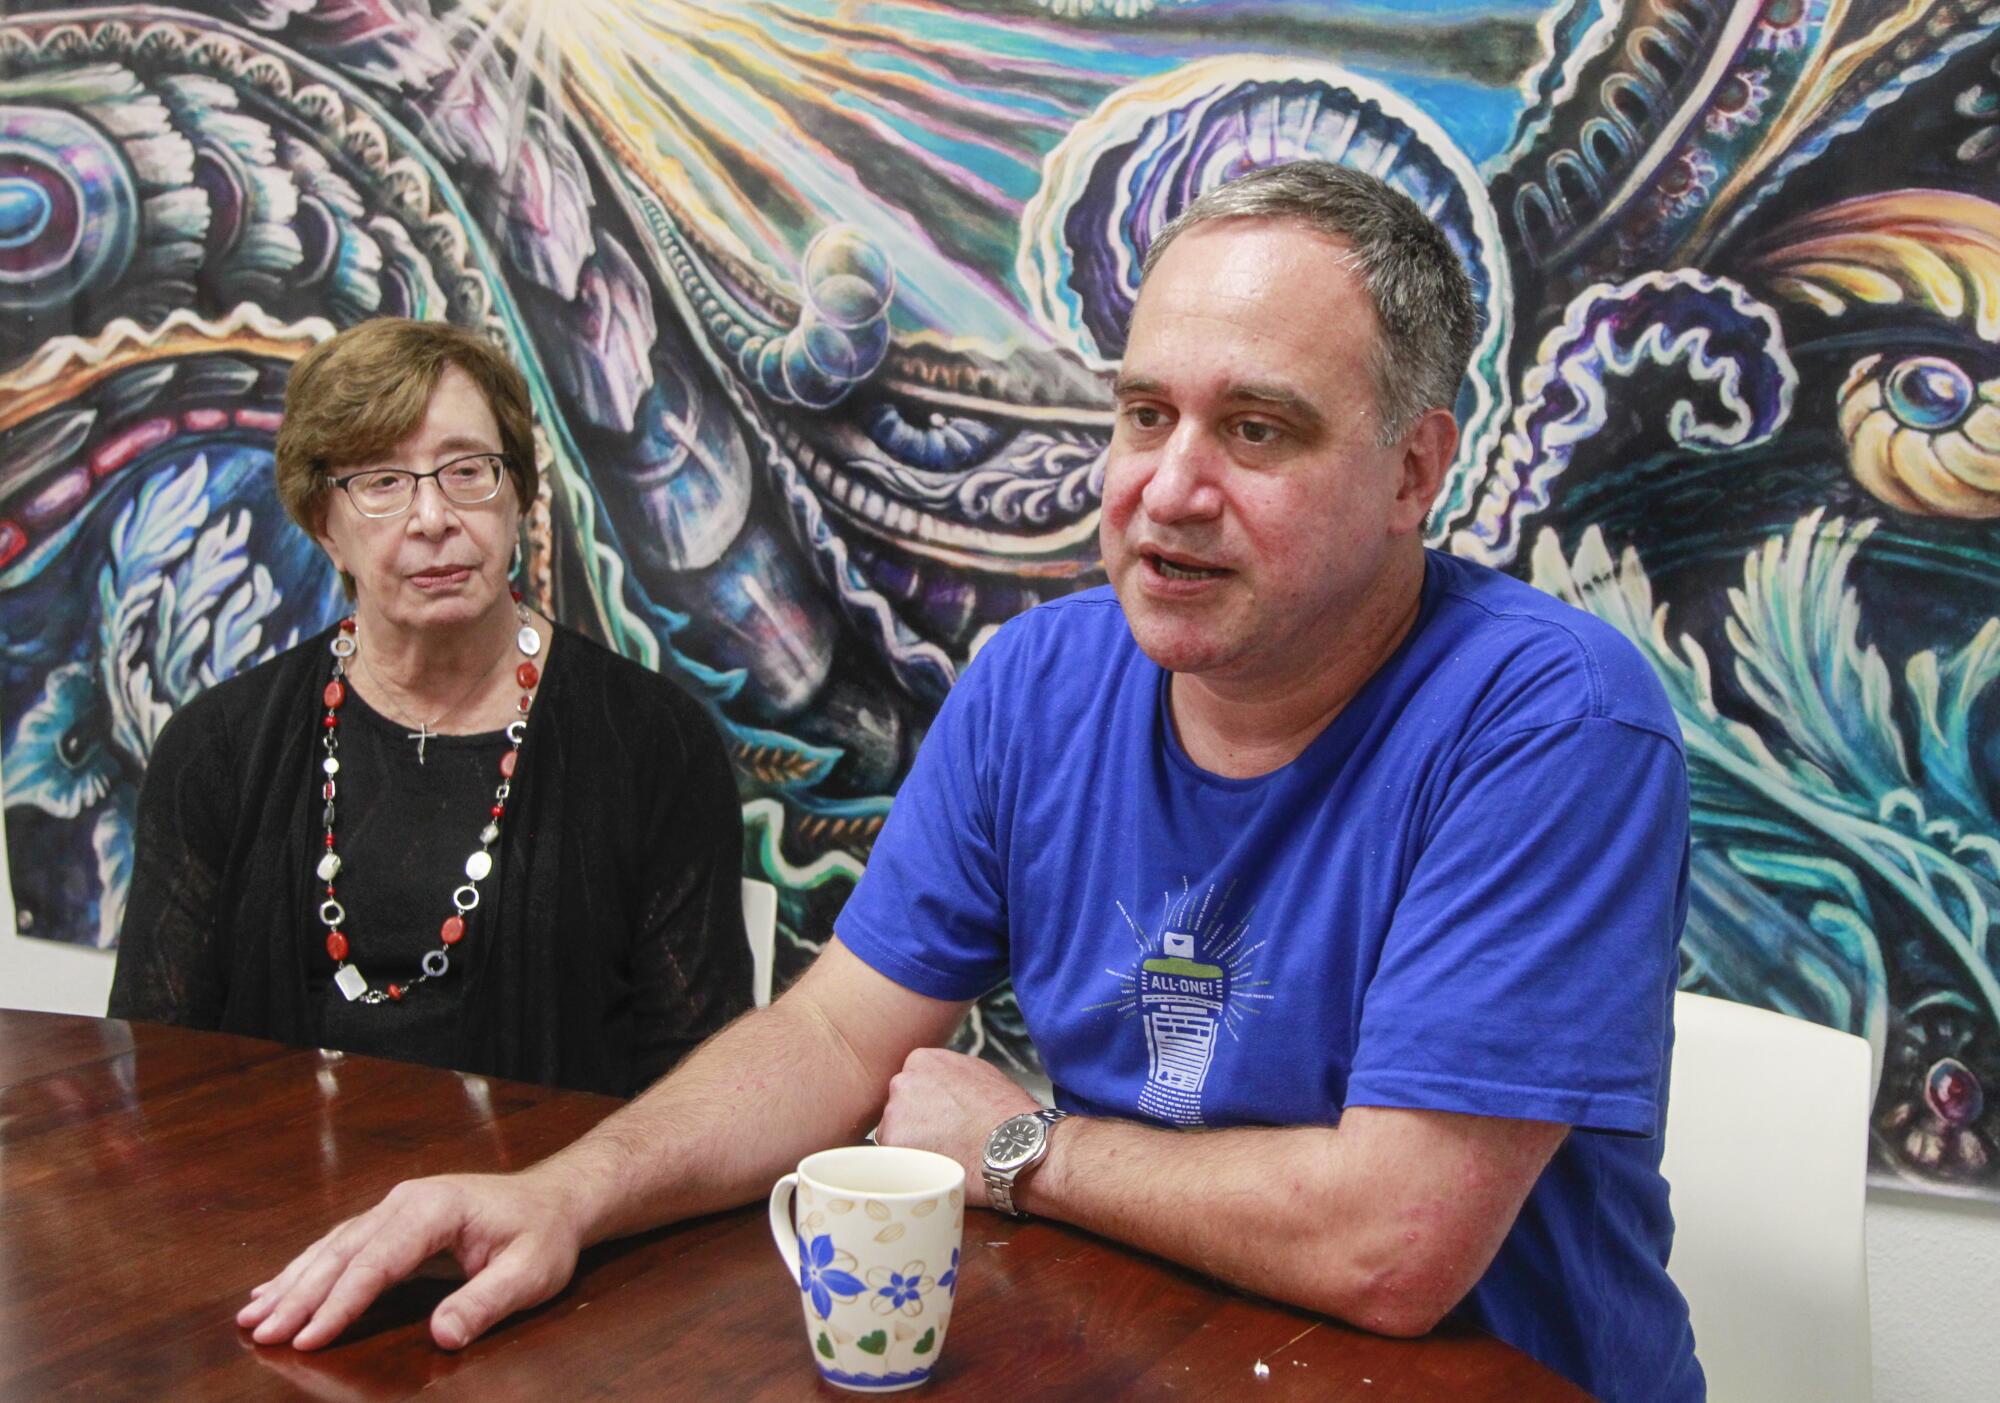 A woman sitting at a table beside a man as he speaks, against a backdrop of a wall with a fanciful psychedelic design.